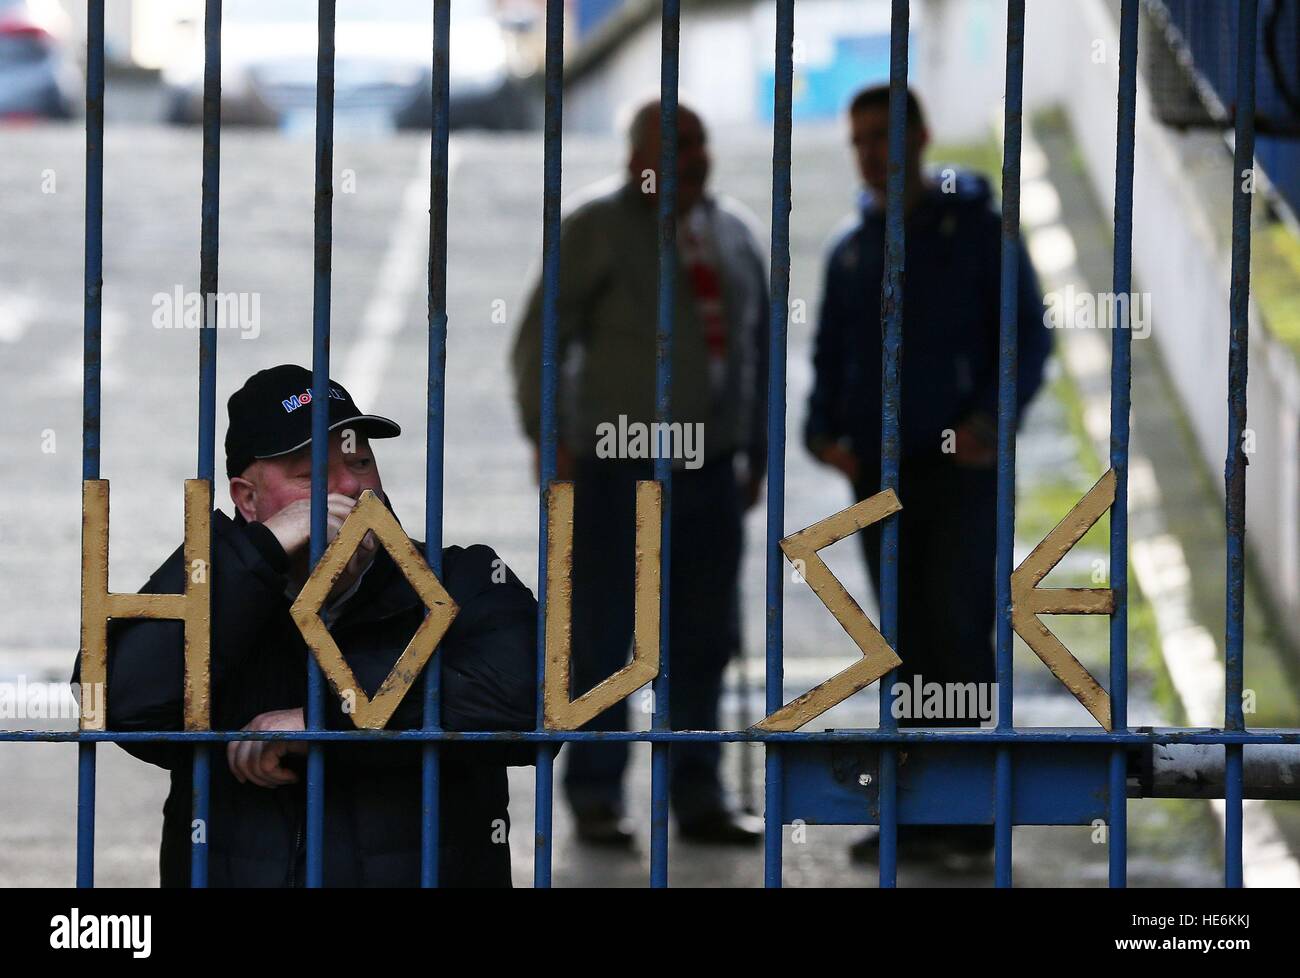 People stand behind the gates of Apollo House, a vacant office block in Dublin city centre which has been occupied by the Homeless activist group 'Home Sweet Home'. Stock Photo